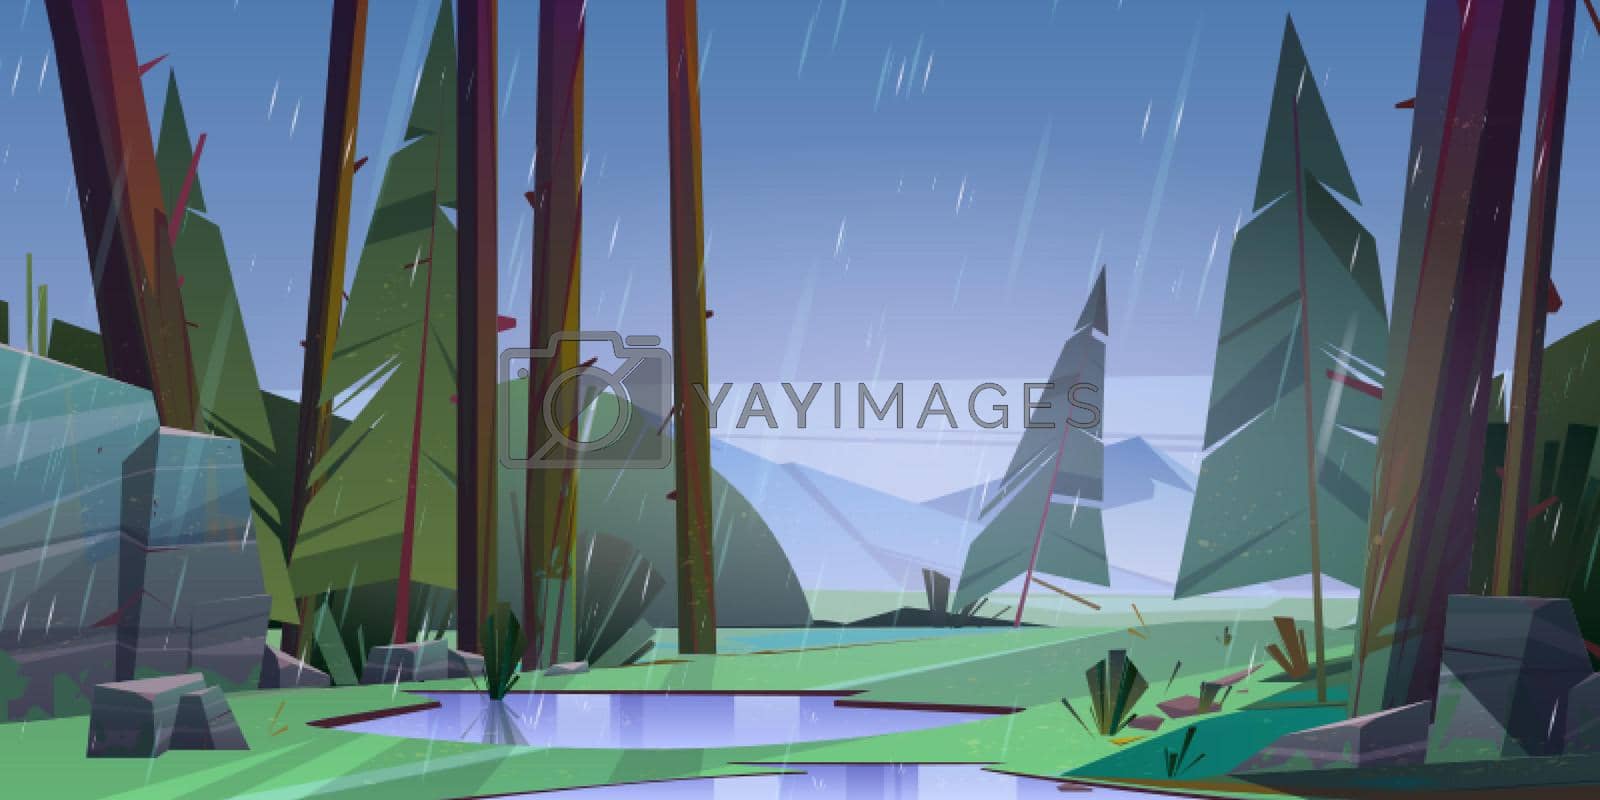 Forest at raining day scenery landscape. Tranquil nature with fir-trees, rocks and rain drops, puddles on ground, summer wood Cartoon vector illustration